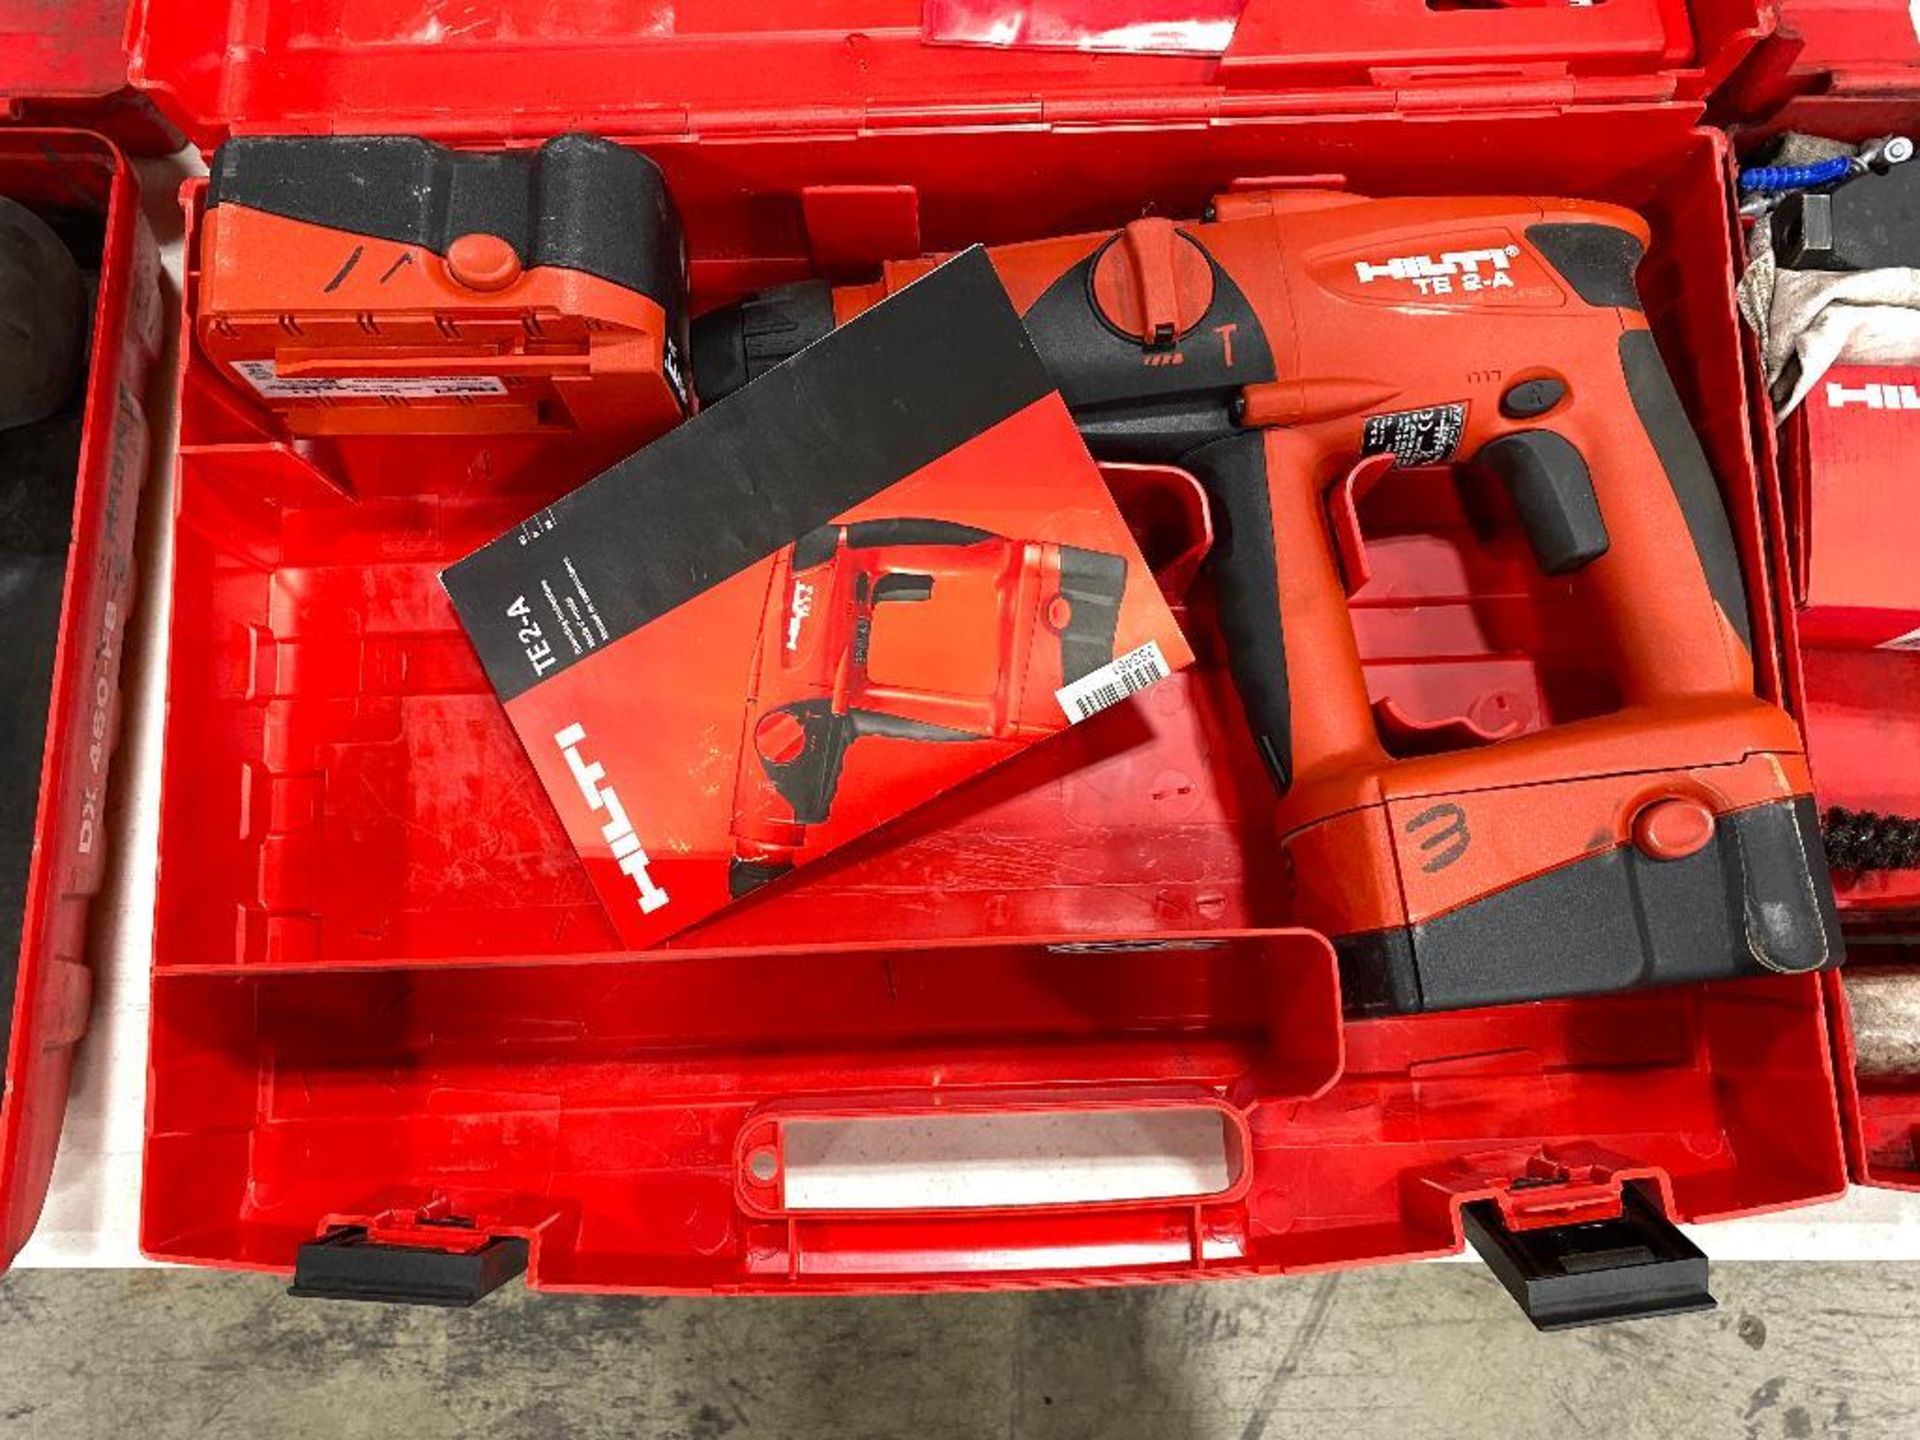 Hilti TE 2-A Rotary Hammer Drill - Image 2 of 3